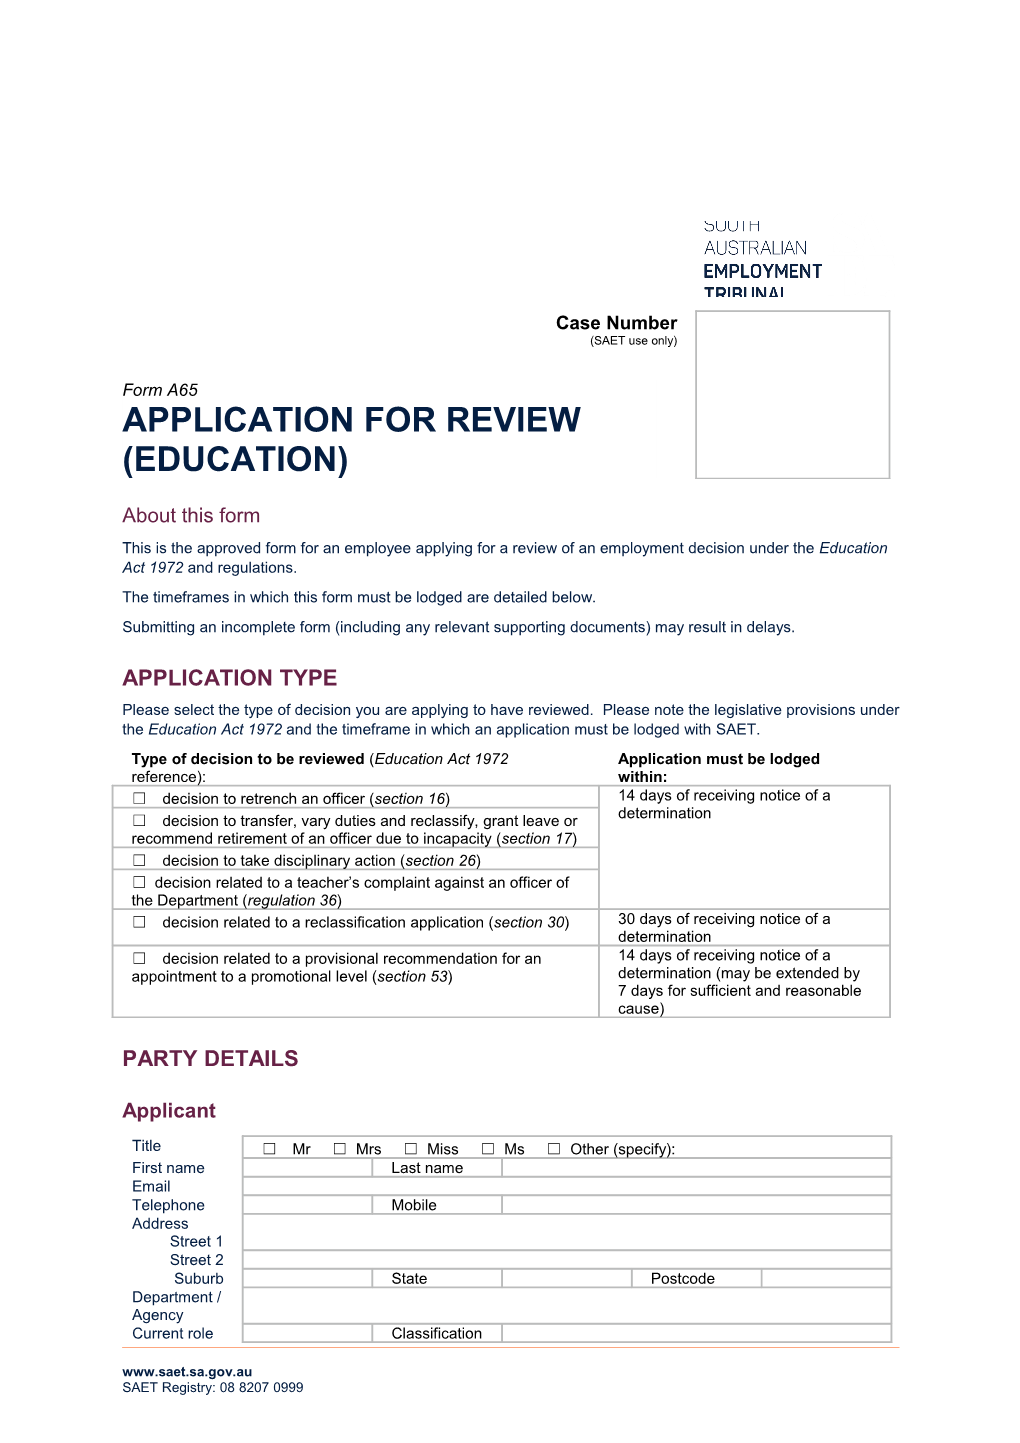 Application for Review (Education)